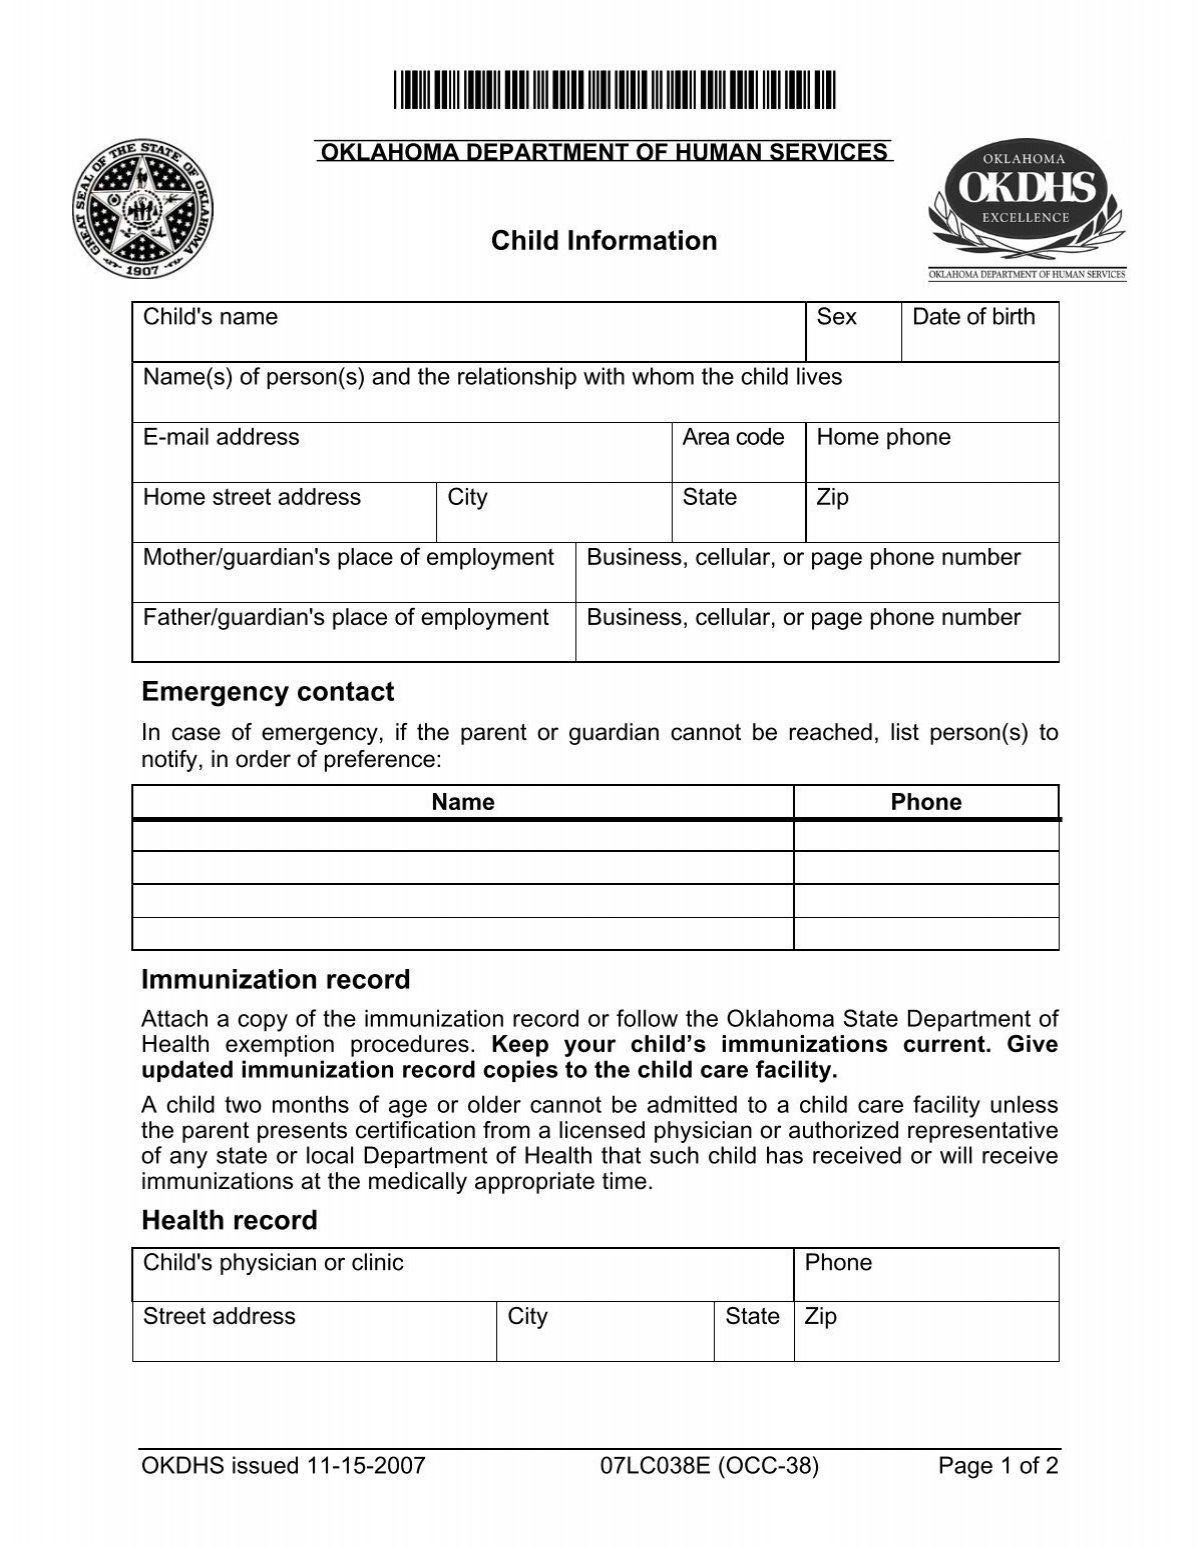 form-07lc038e-oklahoma-department-of-human-services